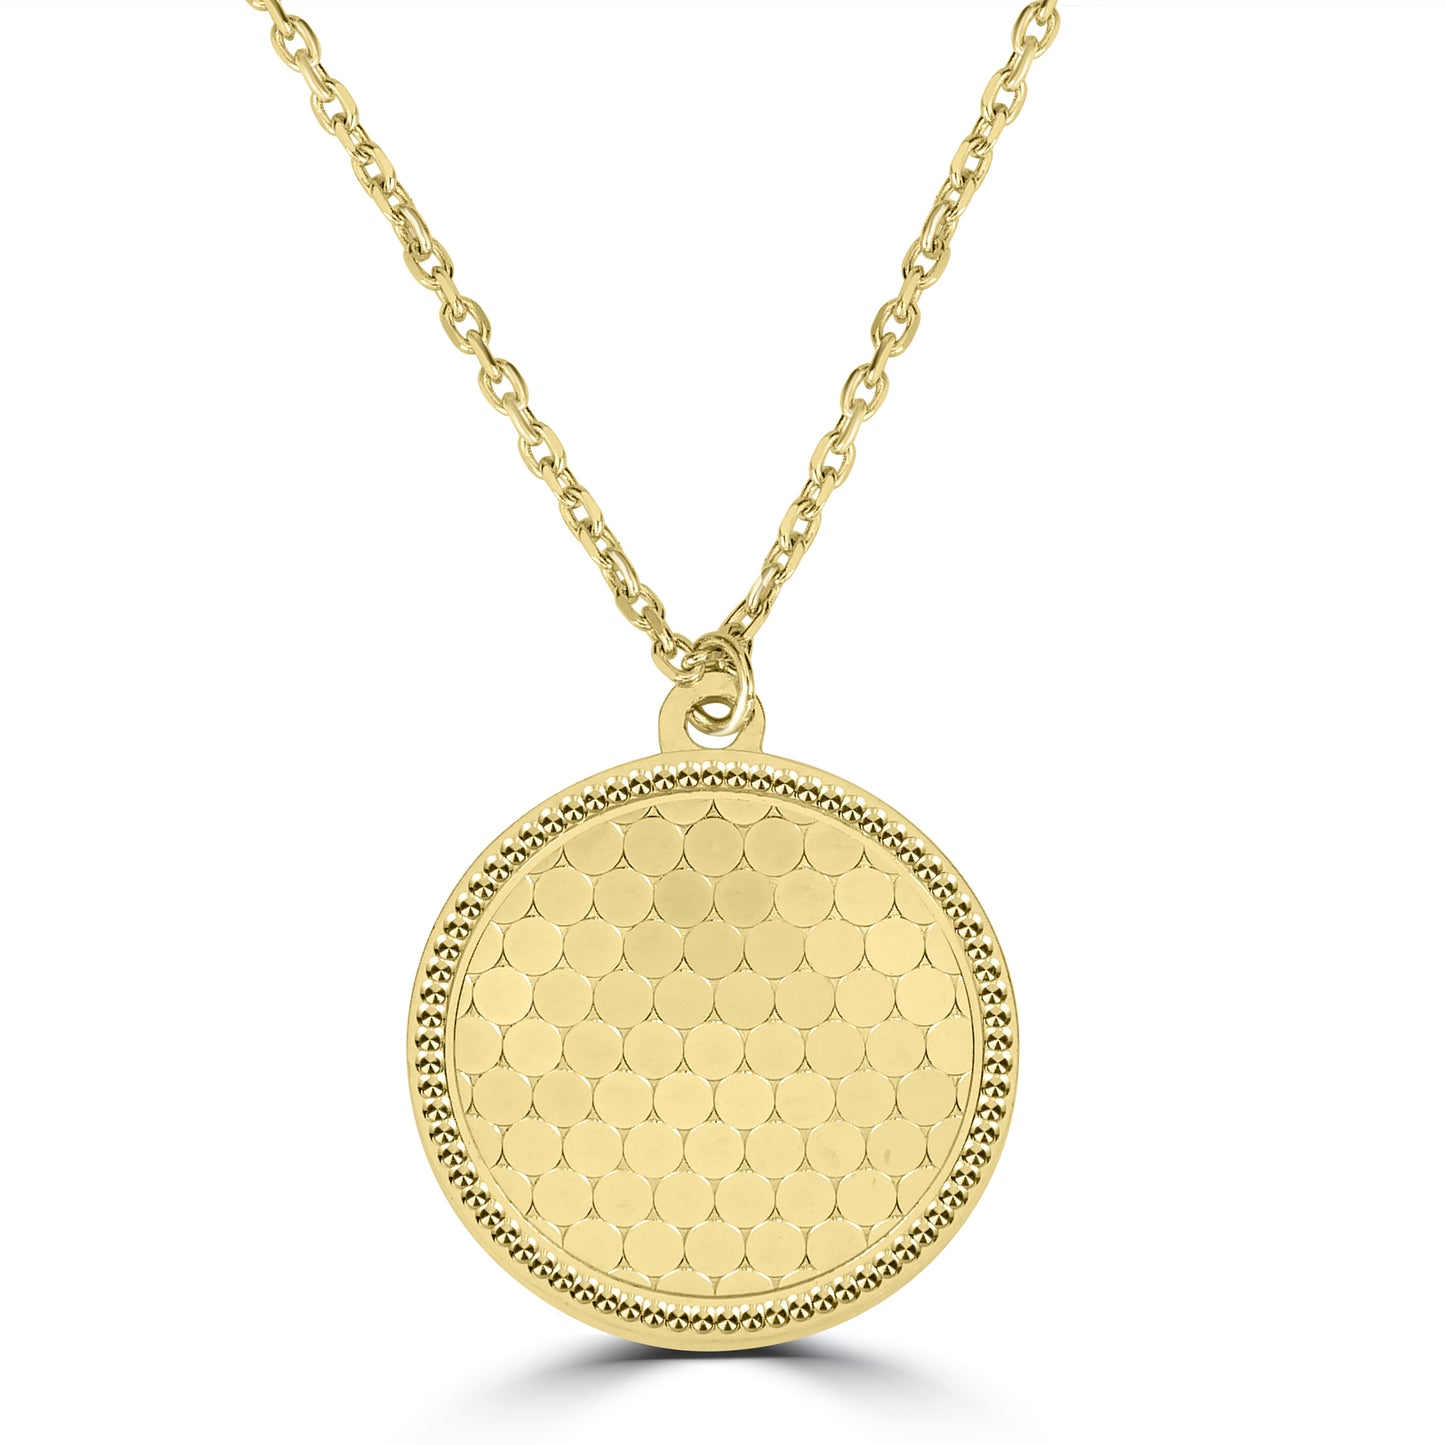 The Round Shimmer Drop Necklace